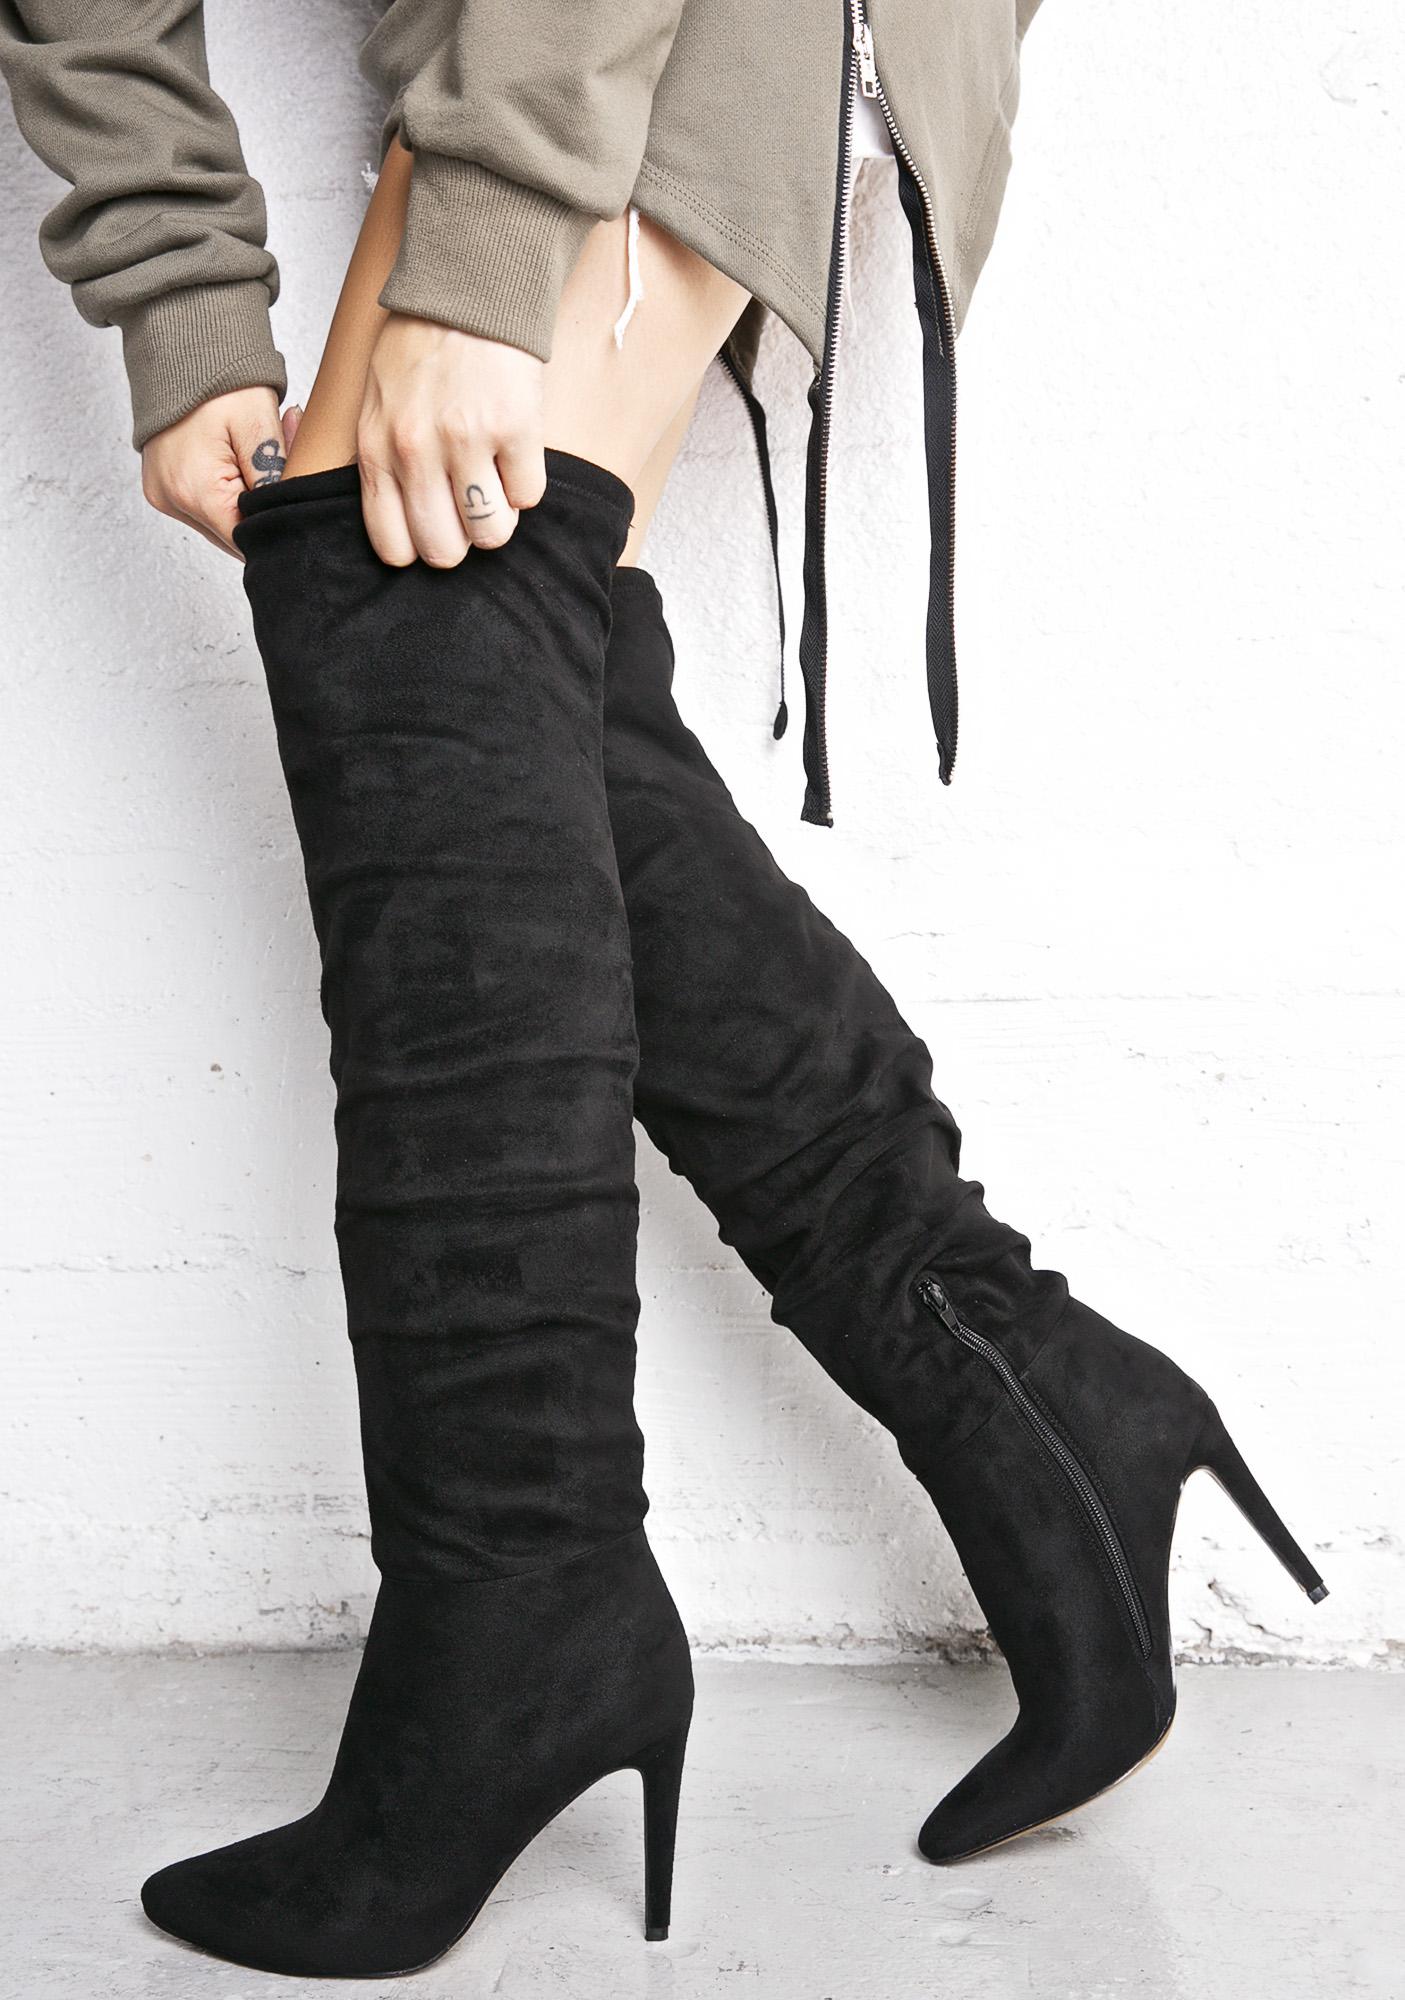 chinese laundry thigh high boots